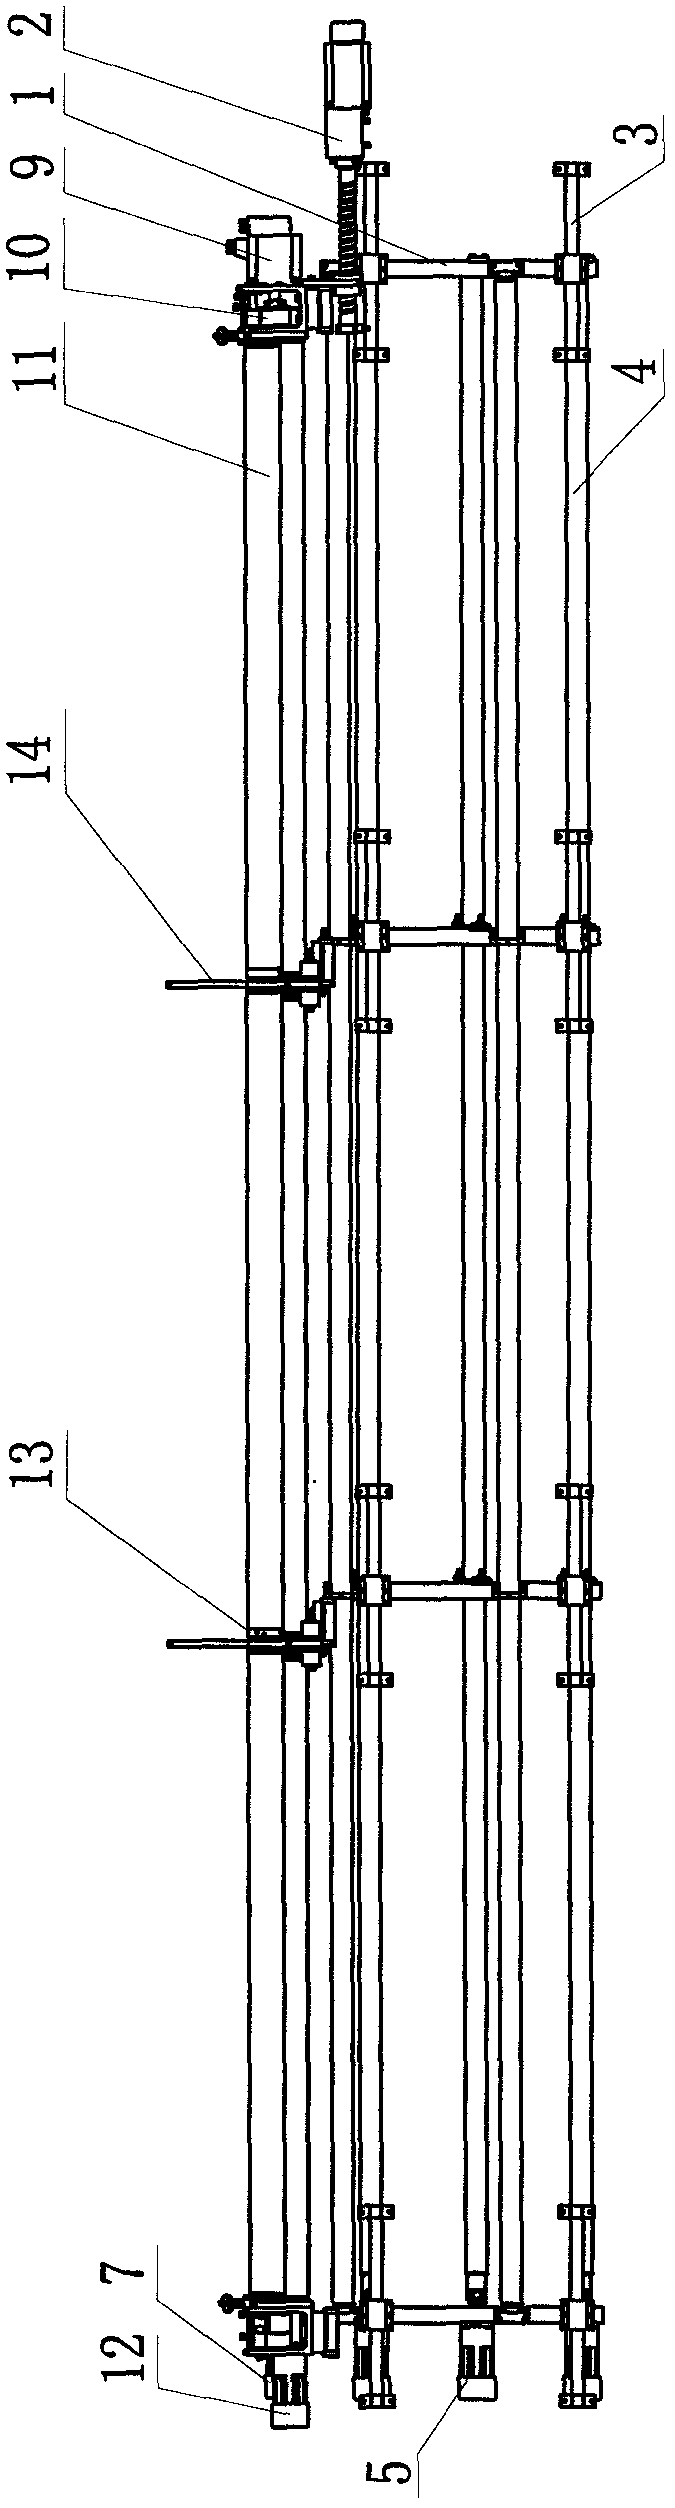 Roller drive mechanism of quilting and embroidering machine allowing multiple pieces of cloth to be connected